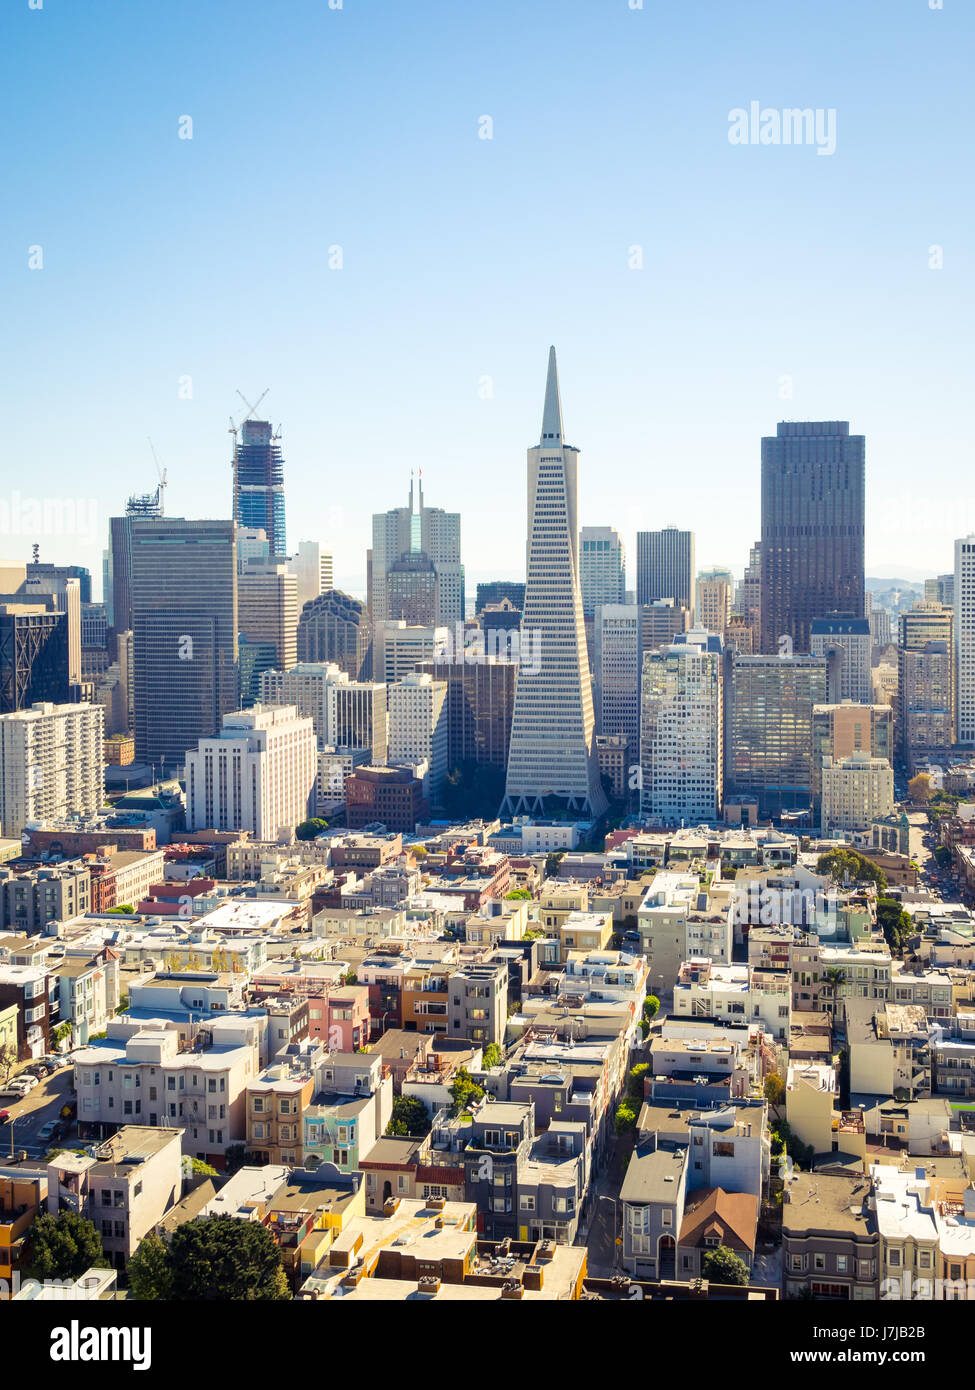 The sensational skyline of downtown San Francisco, California as seen from atop Coit Tower on Telegraph Hill. Stock Photo